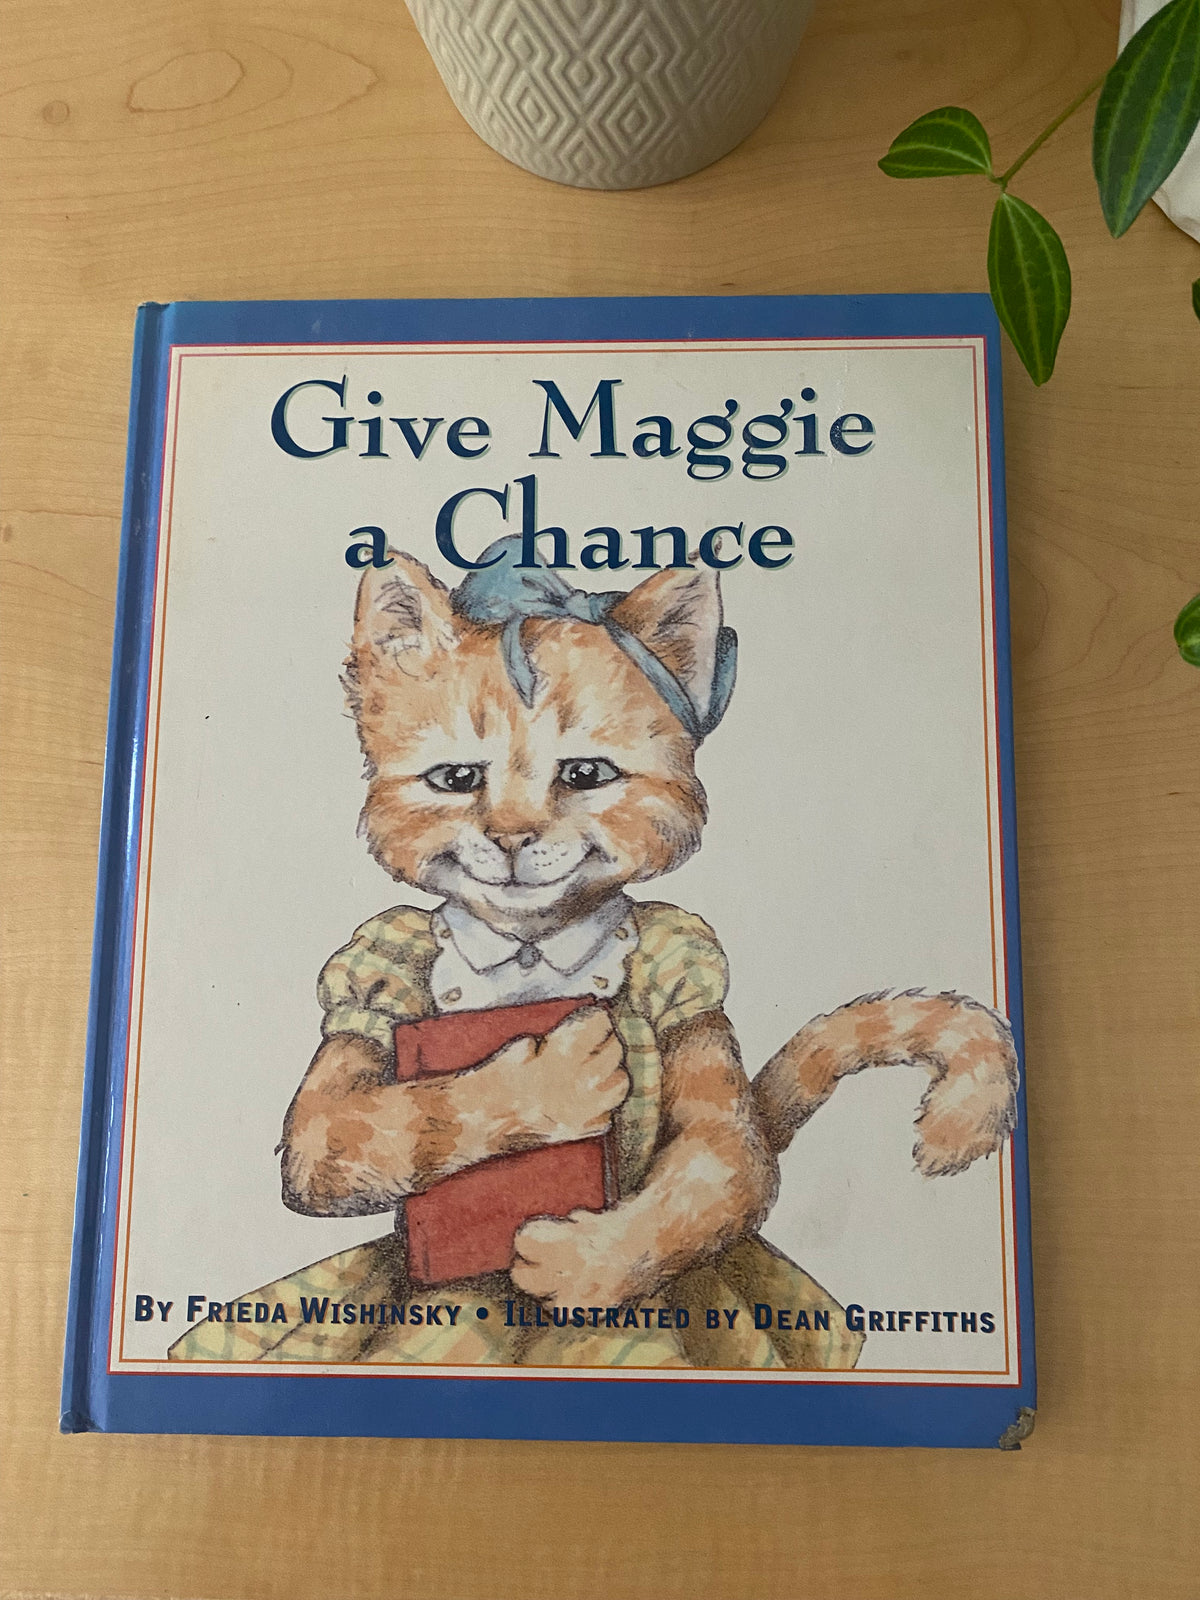 Book - Give Maggie a Chance